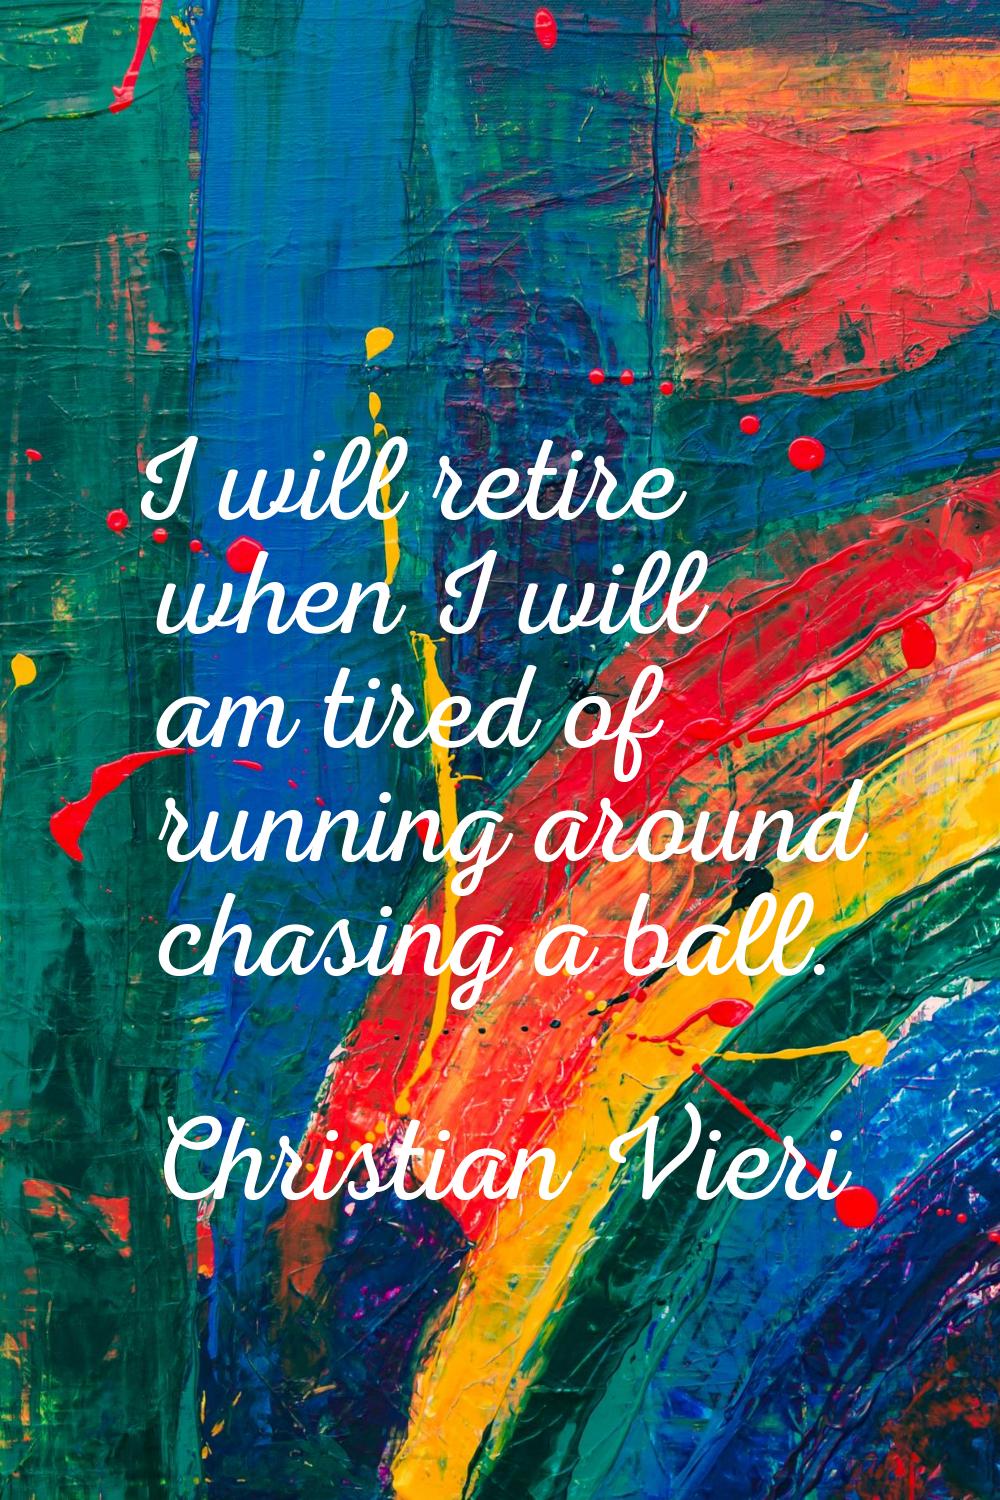 I will retire when I will am tired of running around chasing a ball.